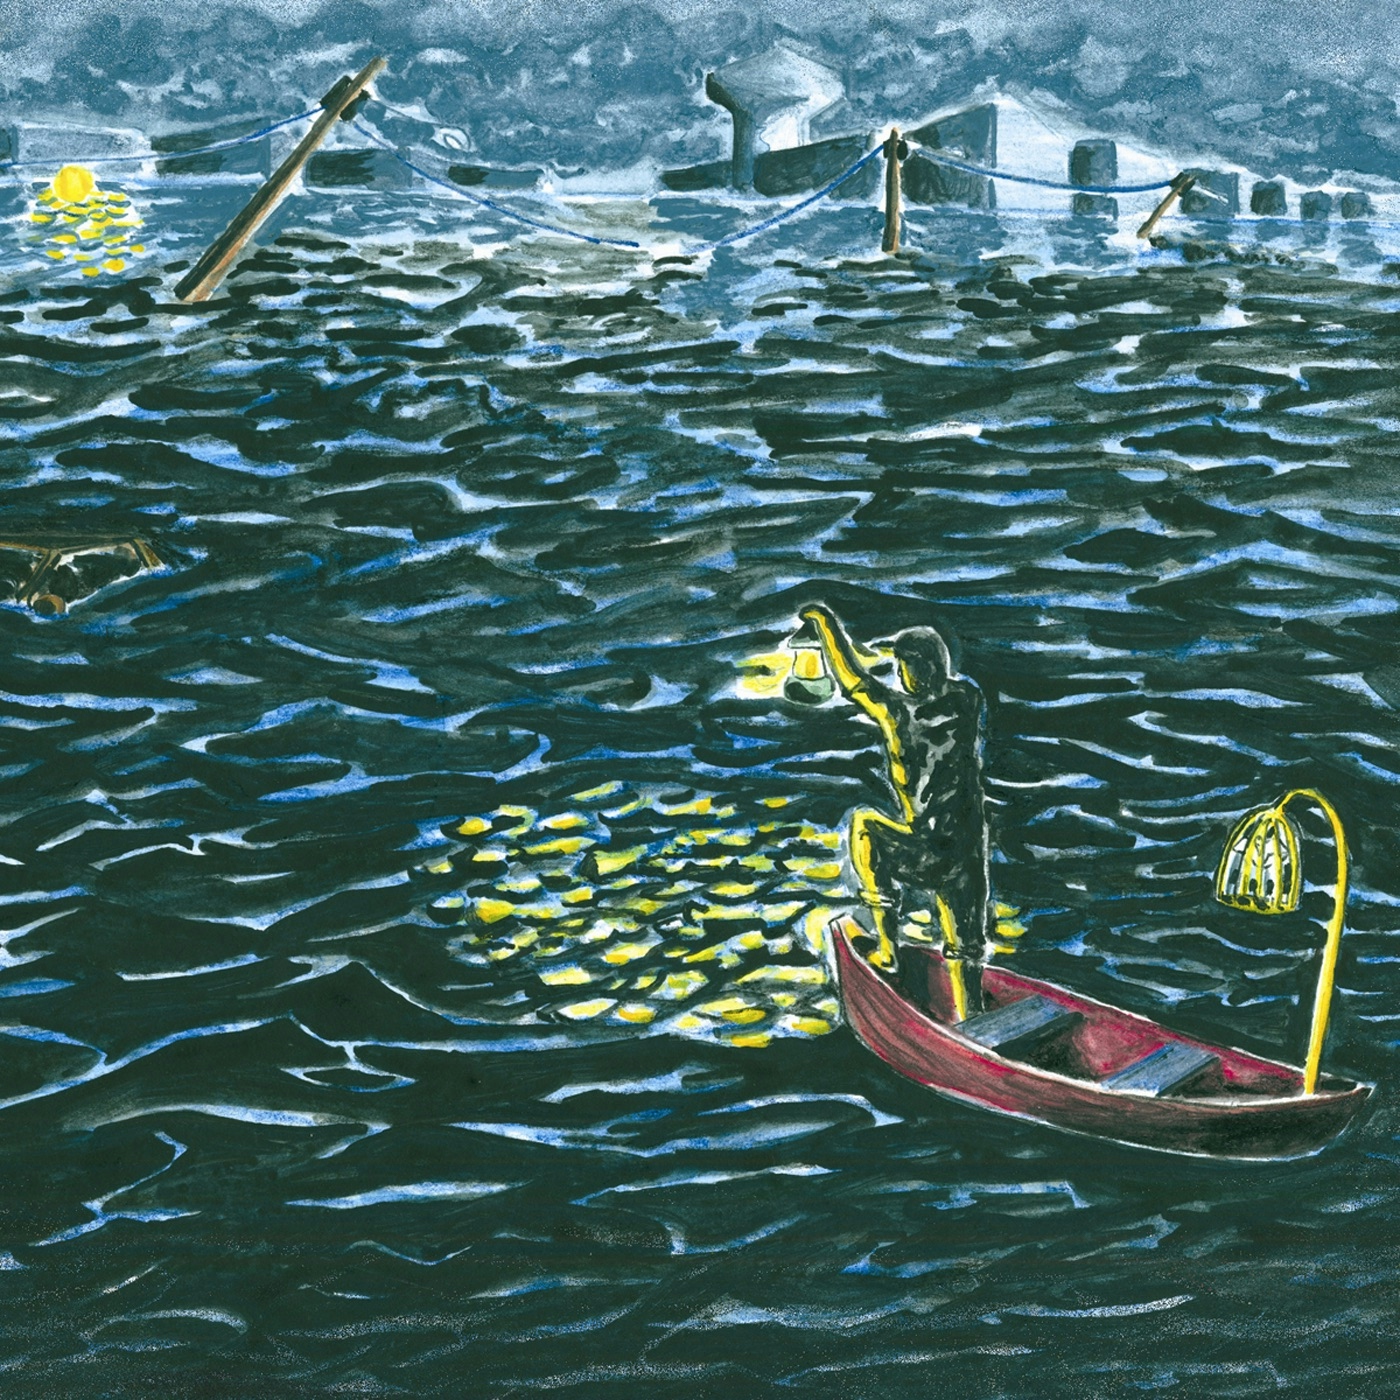 Album artwork for All Of A Sudden I Miss Everyone by Explosions In The Sky